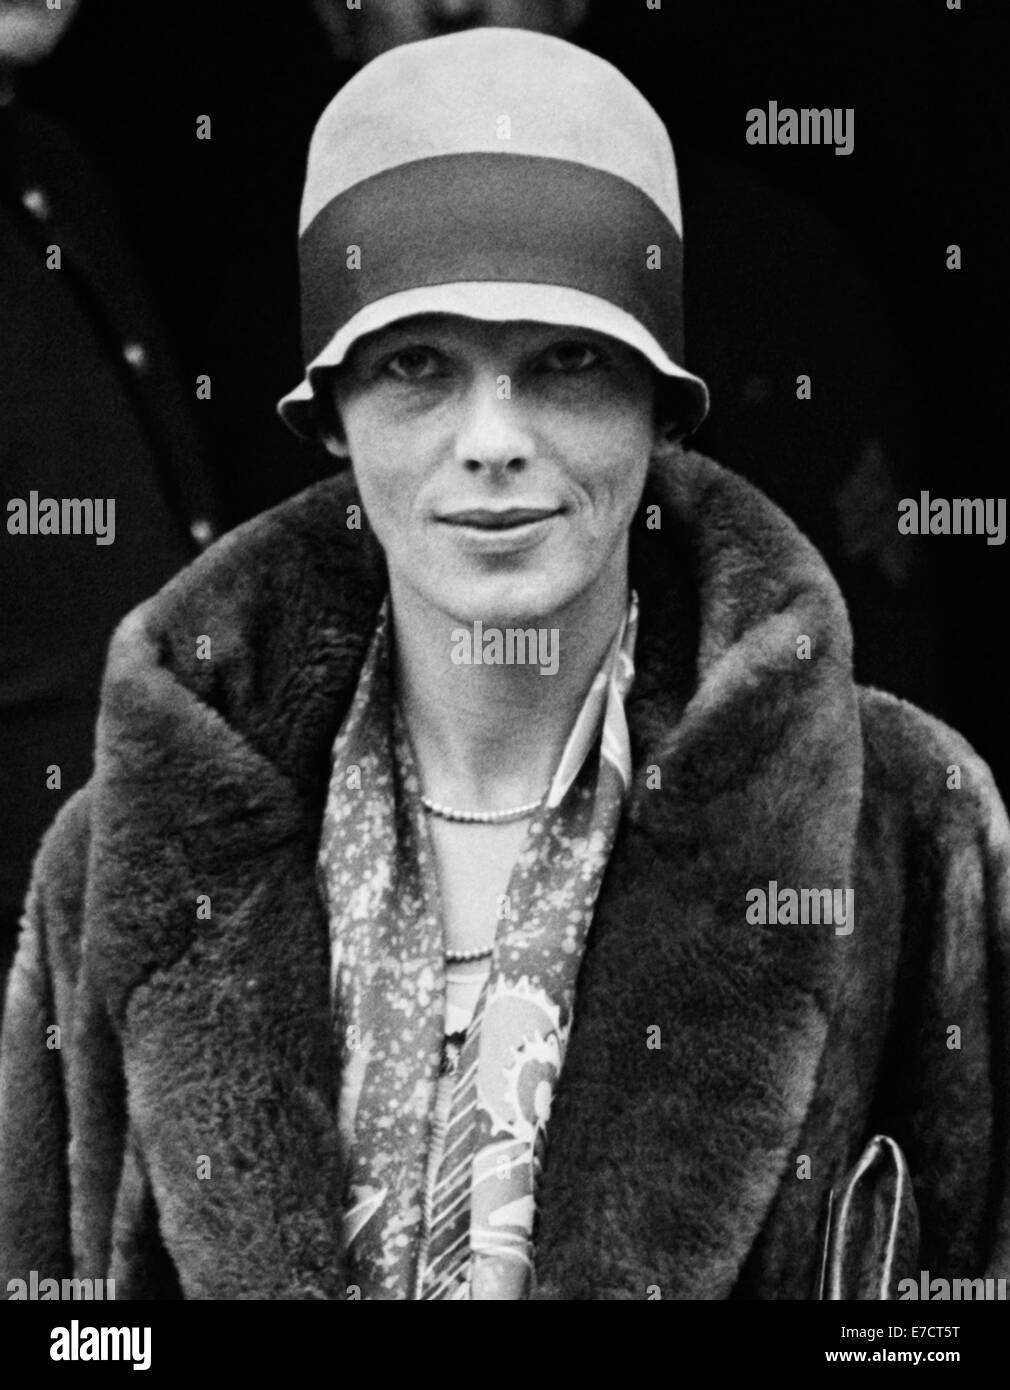 Vintage photo of American aviation pioneer and author Amelia Earhart (1897 – declared dead 1939) – Earhart and her navigator Fred Noonan famously vanished in 1937 while she was trying to become the first female to complete a circumnavigational flight of the globe. Earhart is pictured in November 1928 outside The White House during a visit to see President Calvin Coolidge. Stock Photo